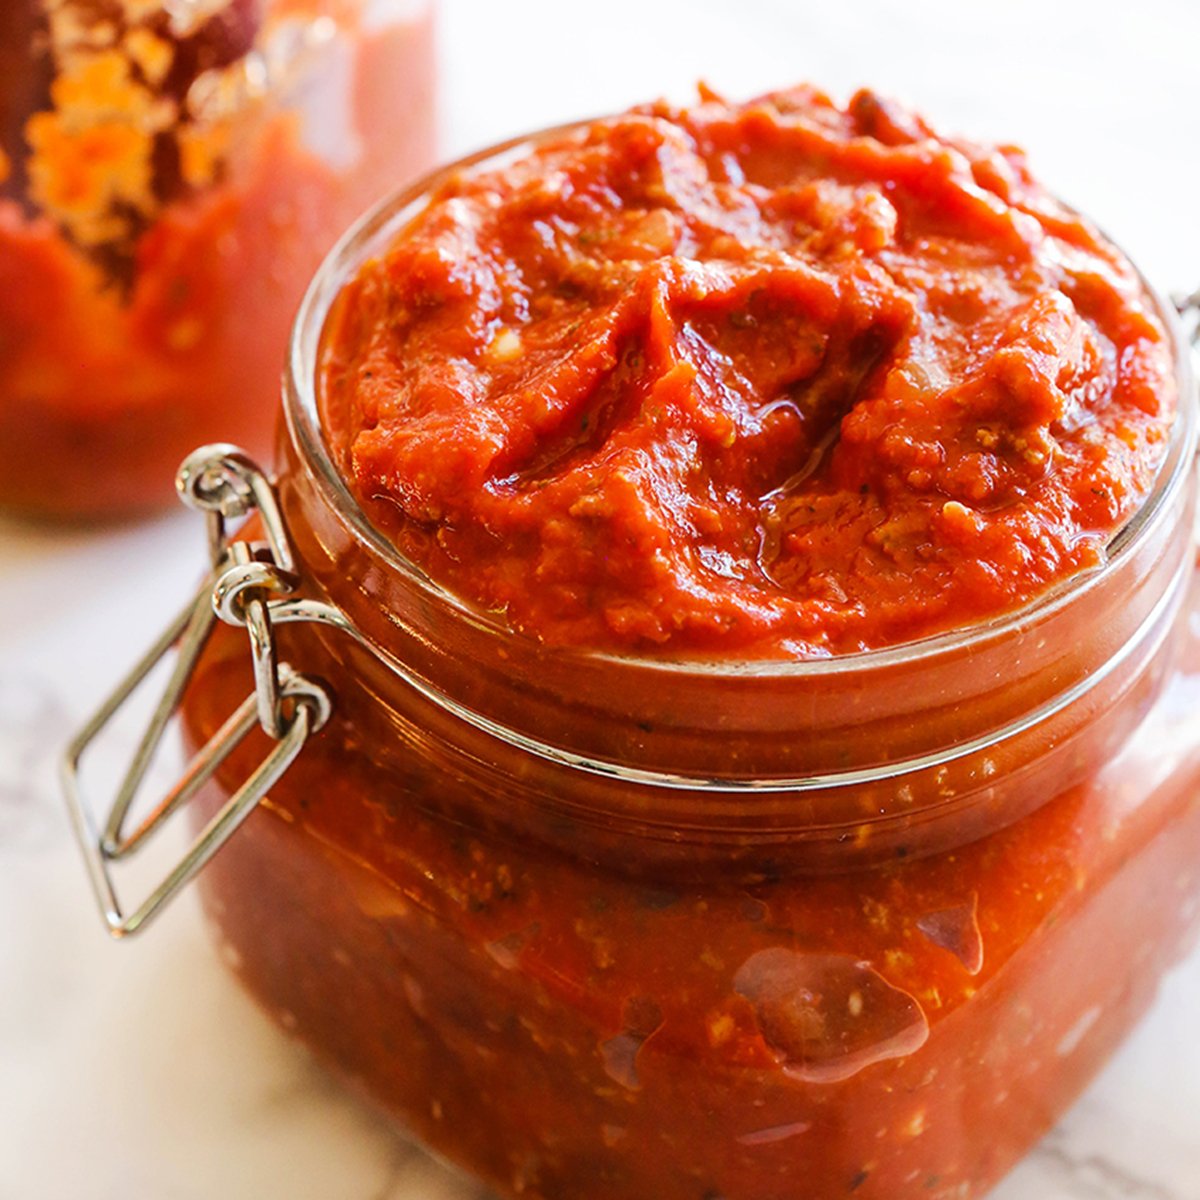 Mason jar overflowing with a thick red sauce.